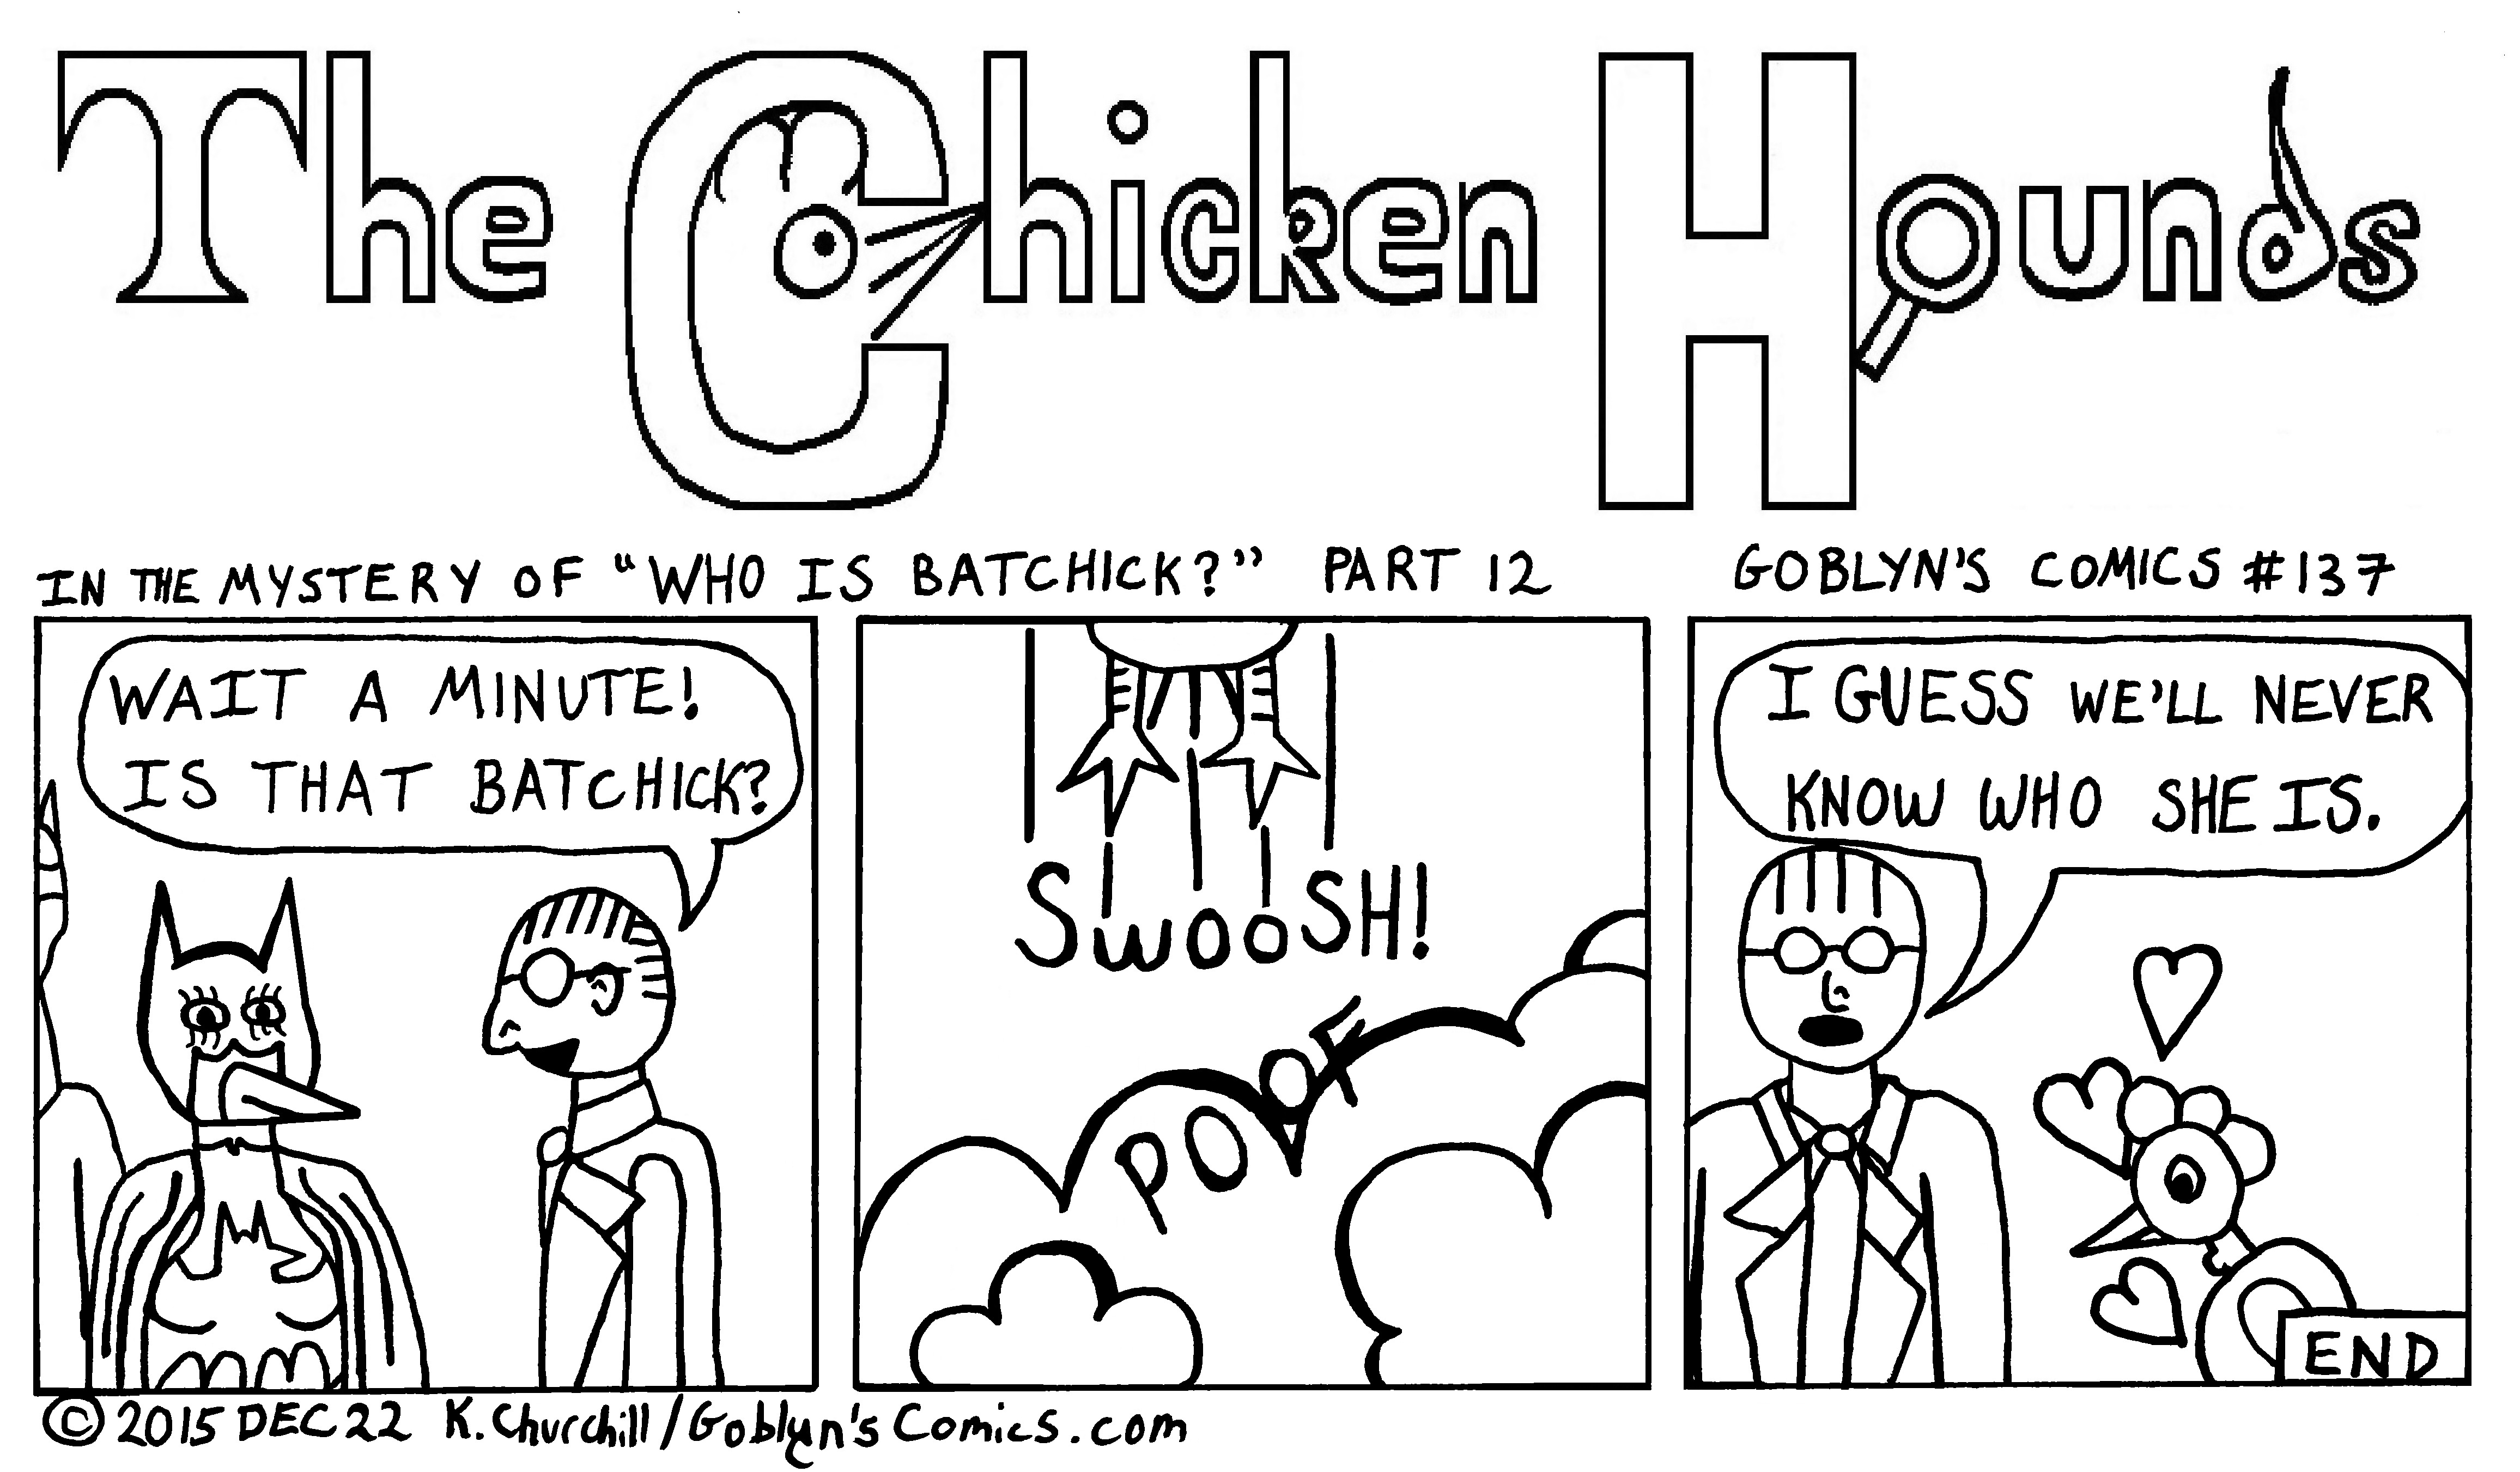 Chicken Hounds in "Who is BatChick" part 12